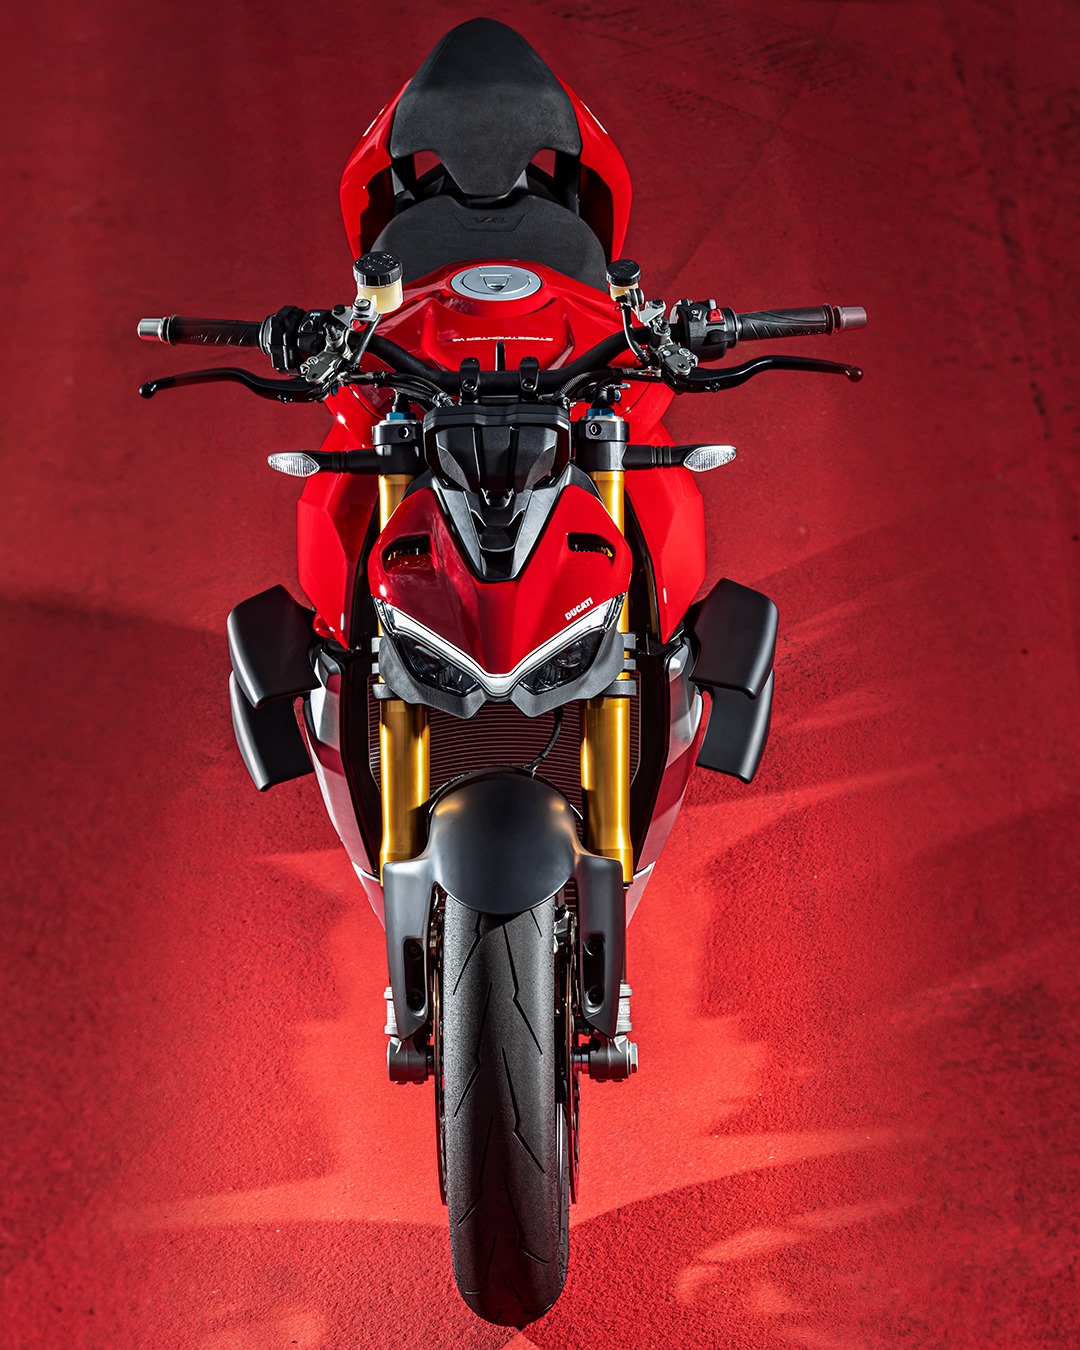 Ducati The new Streetfighter V4 stems from the